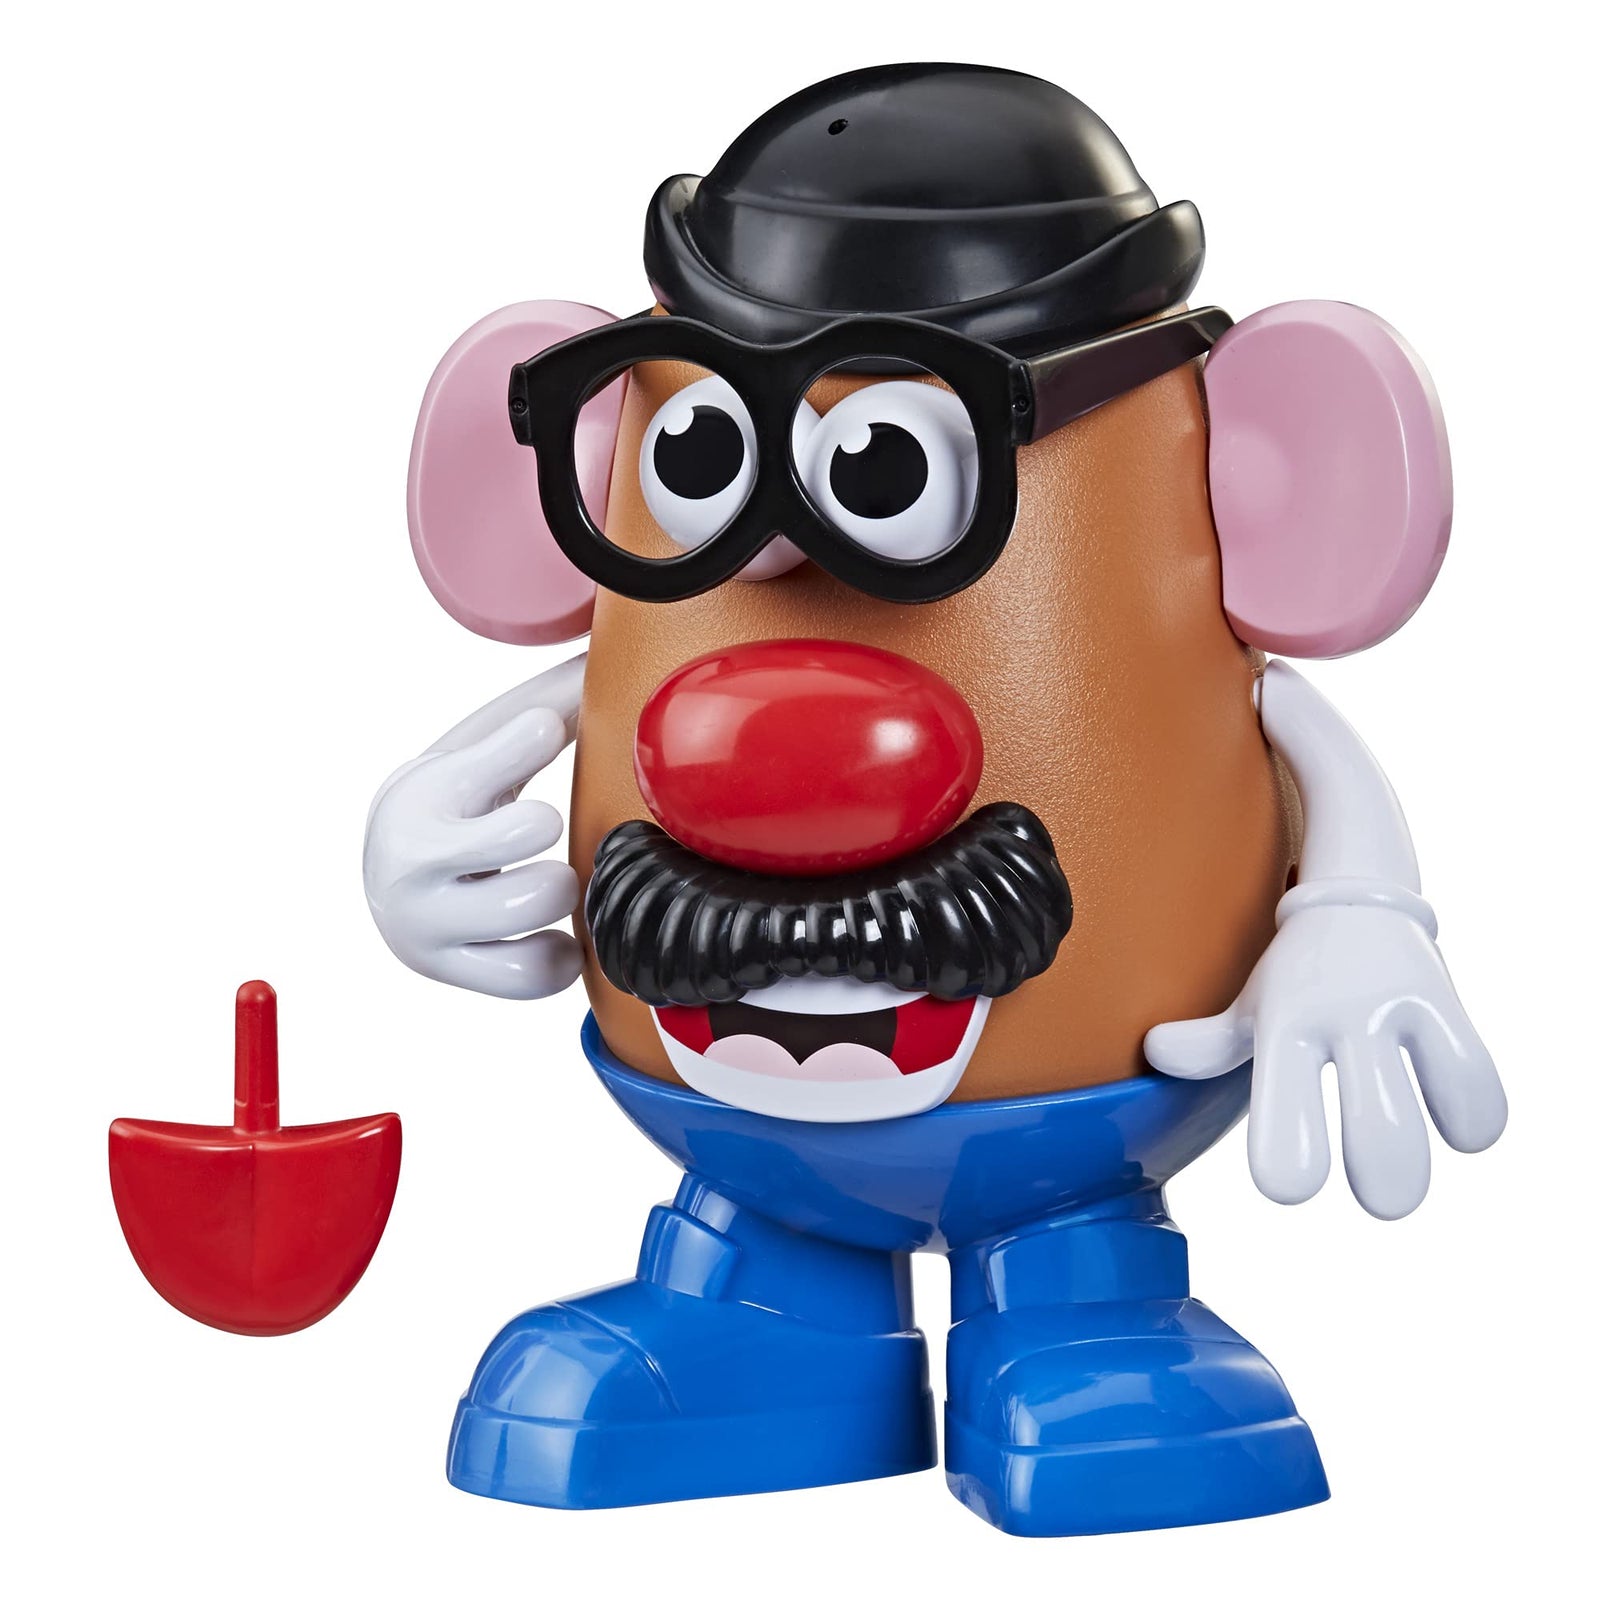 Mr Potato Head Potato Head Classic Toy for Kids Ages 2 and Up, Includes 13 Parts and Pieces to Create Funny Faces